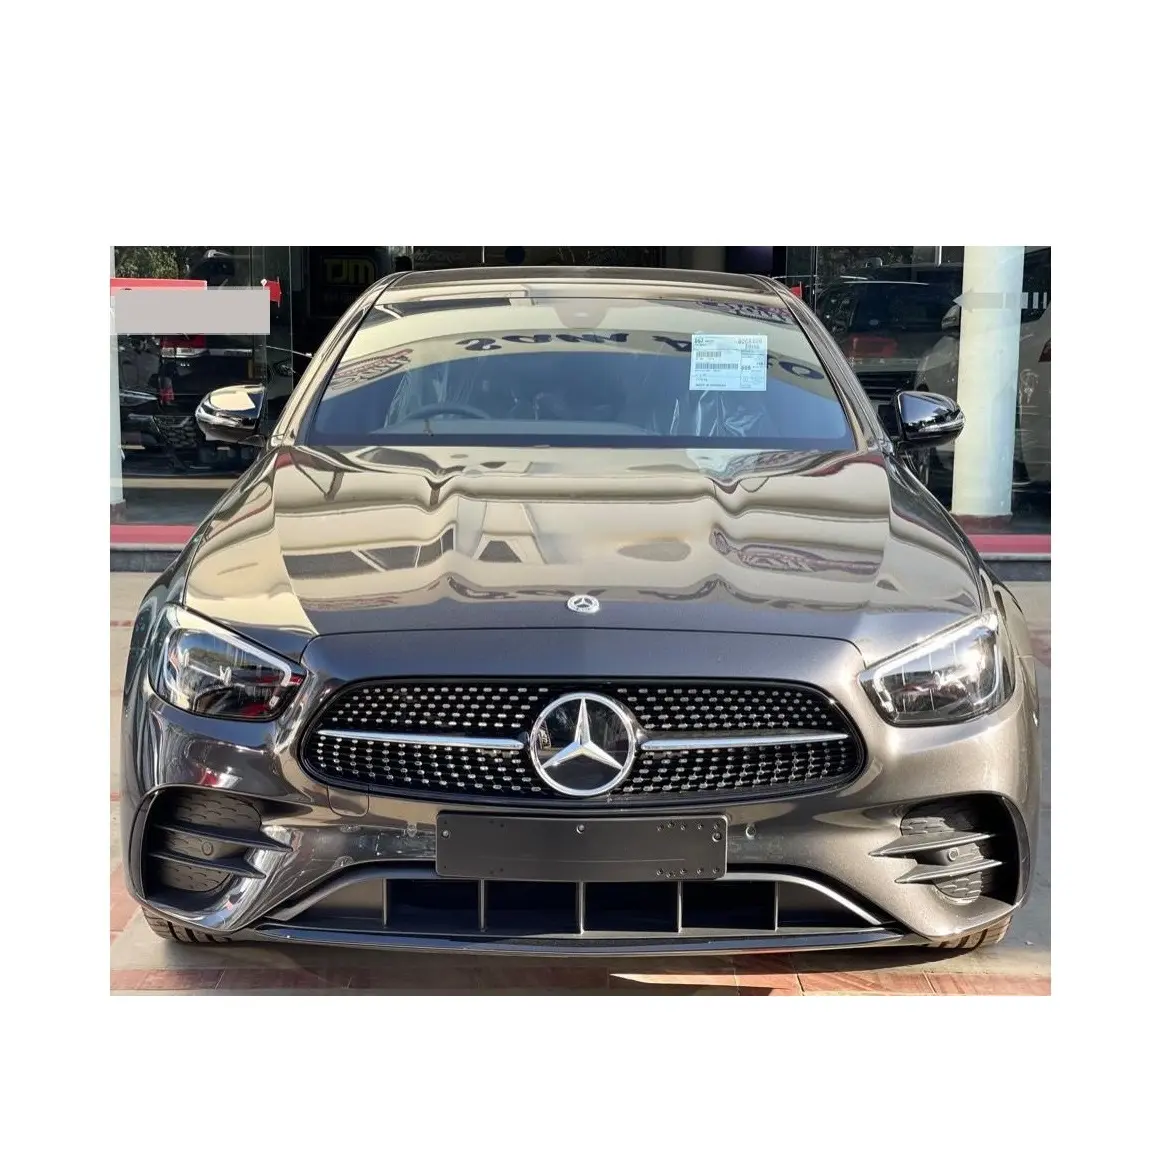 Available Bulk Numbers Of Mercedes-Benz- Approved Used Cars At Lowest Prices